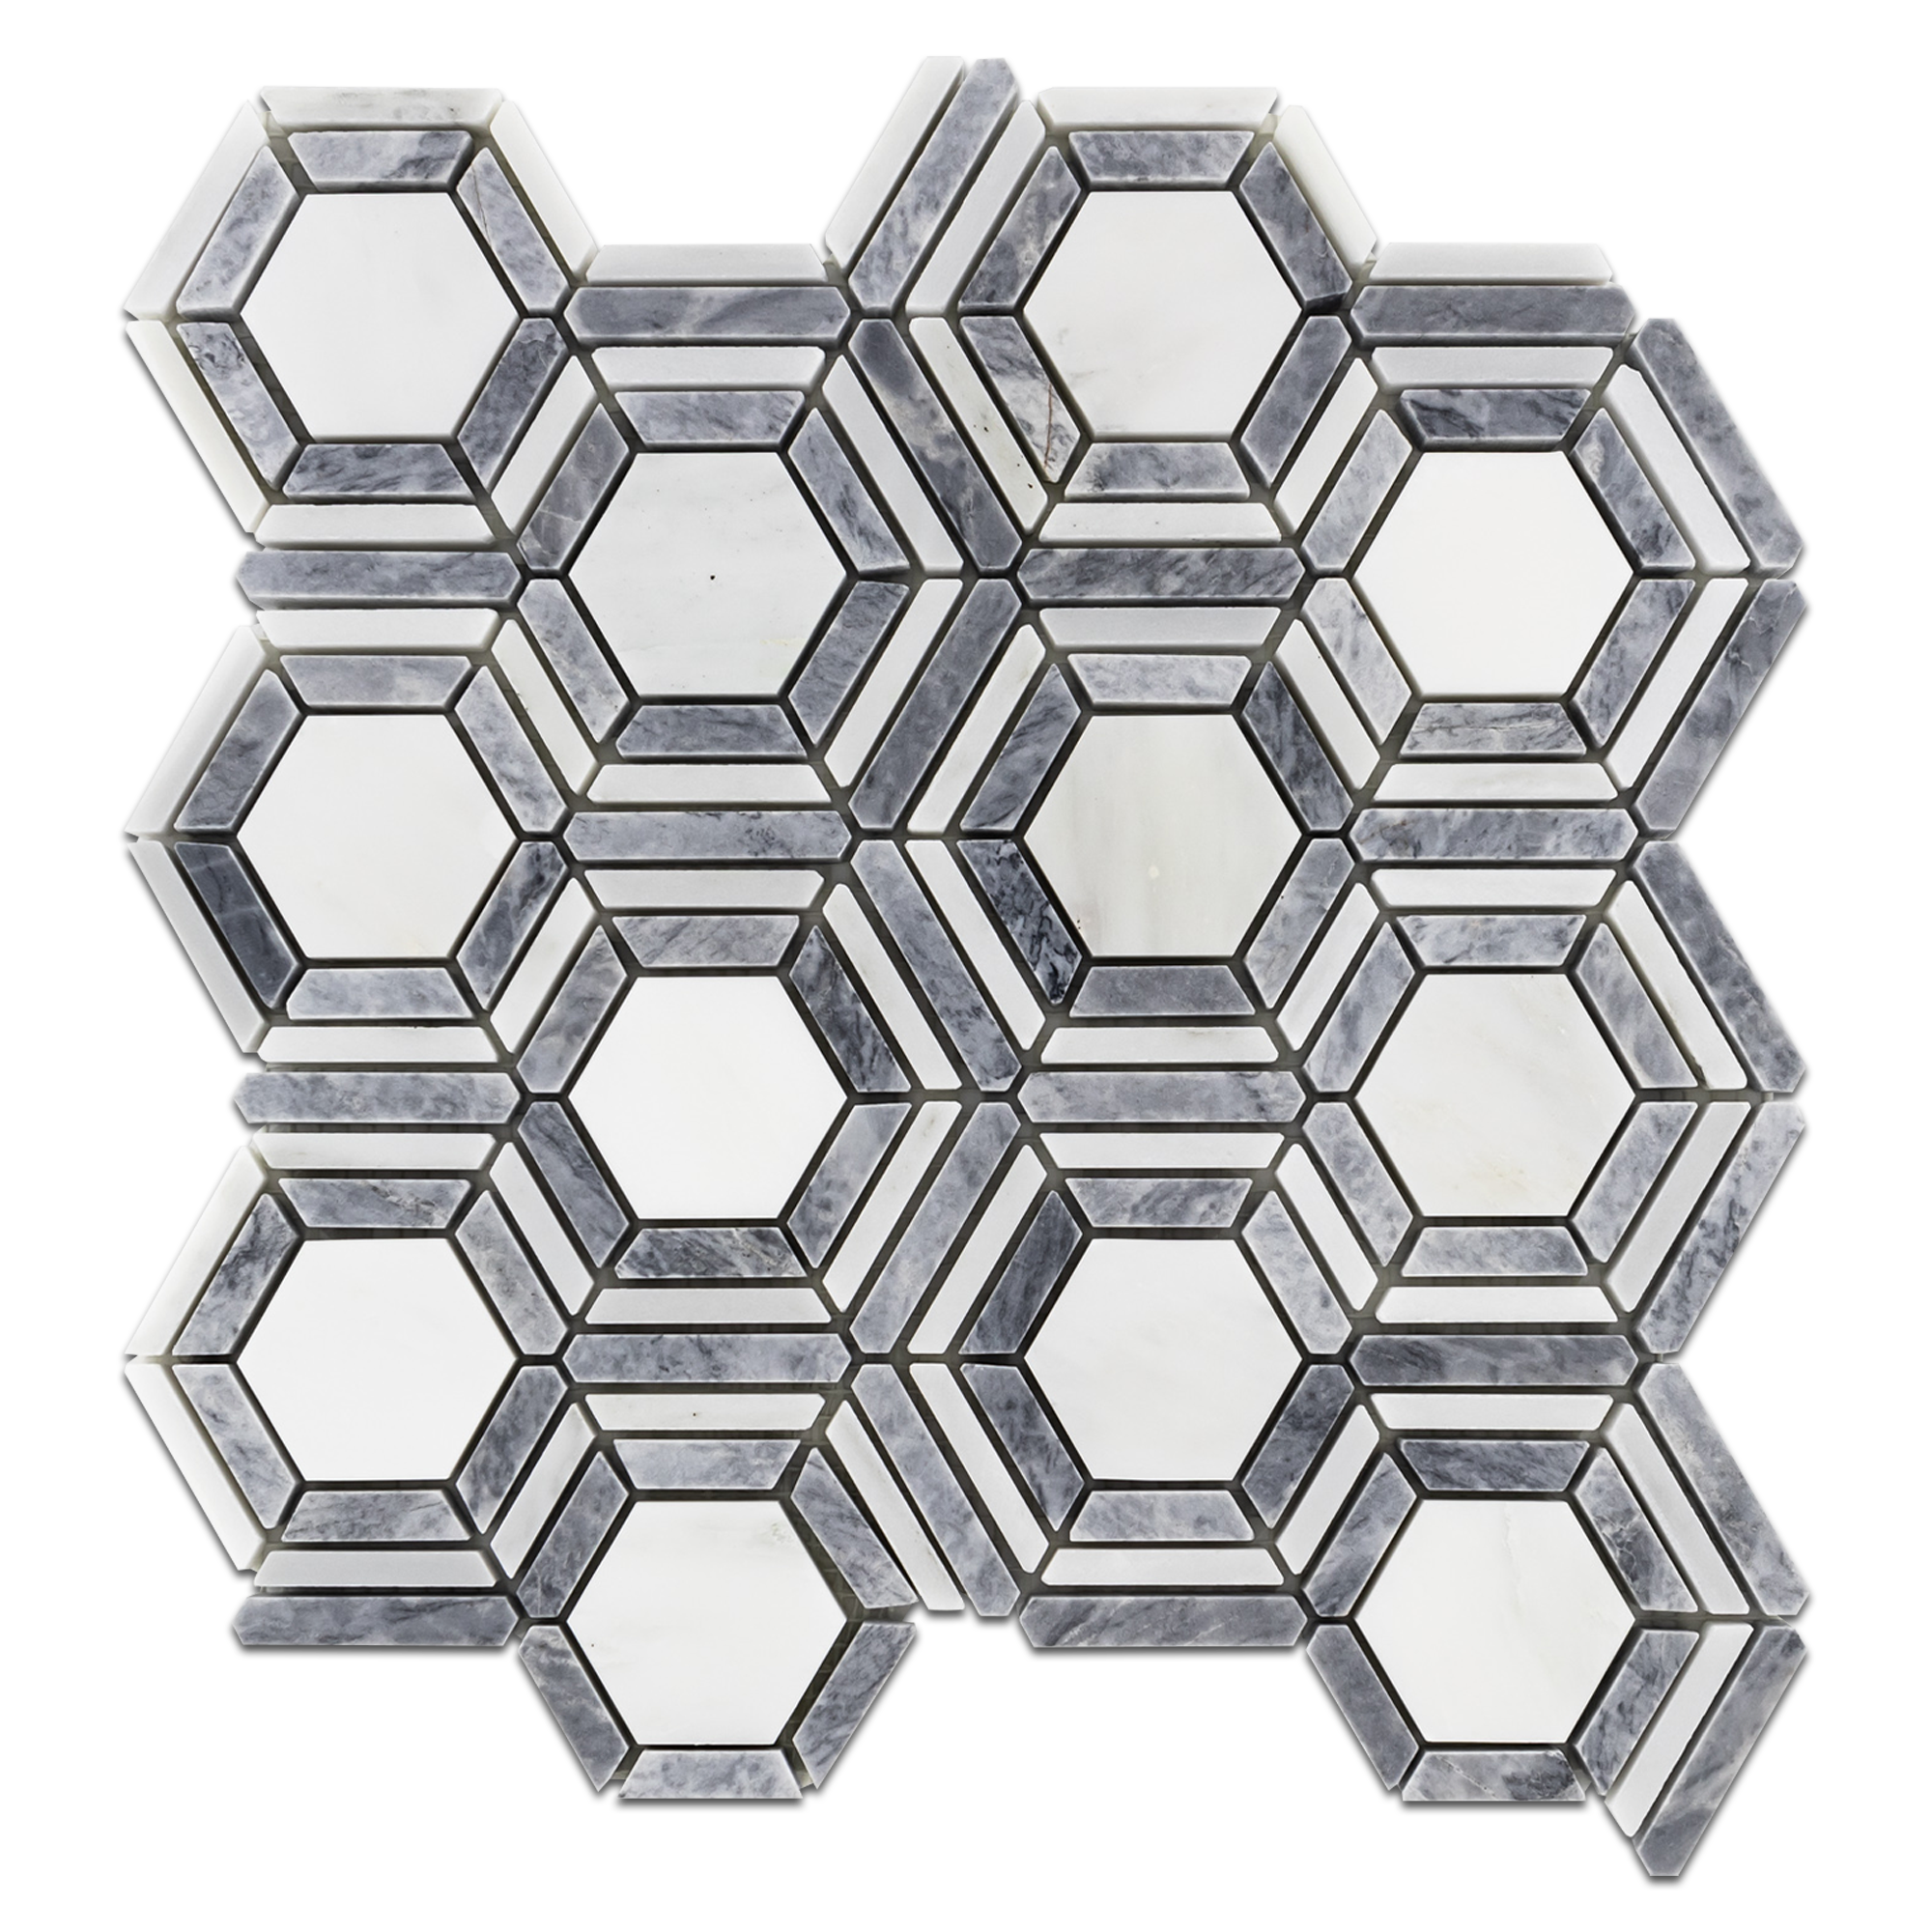 Elon Pearl White Pacific Gray Marble Outlined Hexagon Field Mosaic 12.125x12.1875x0.375 Honed - Surface Group International Product